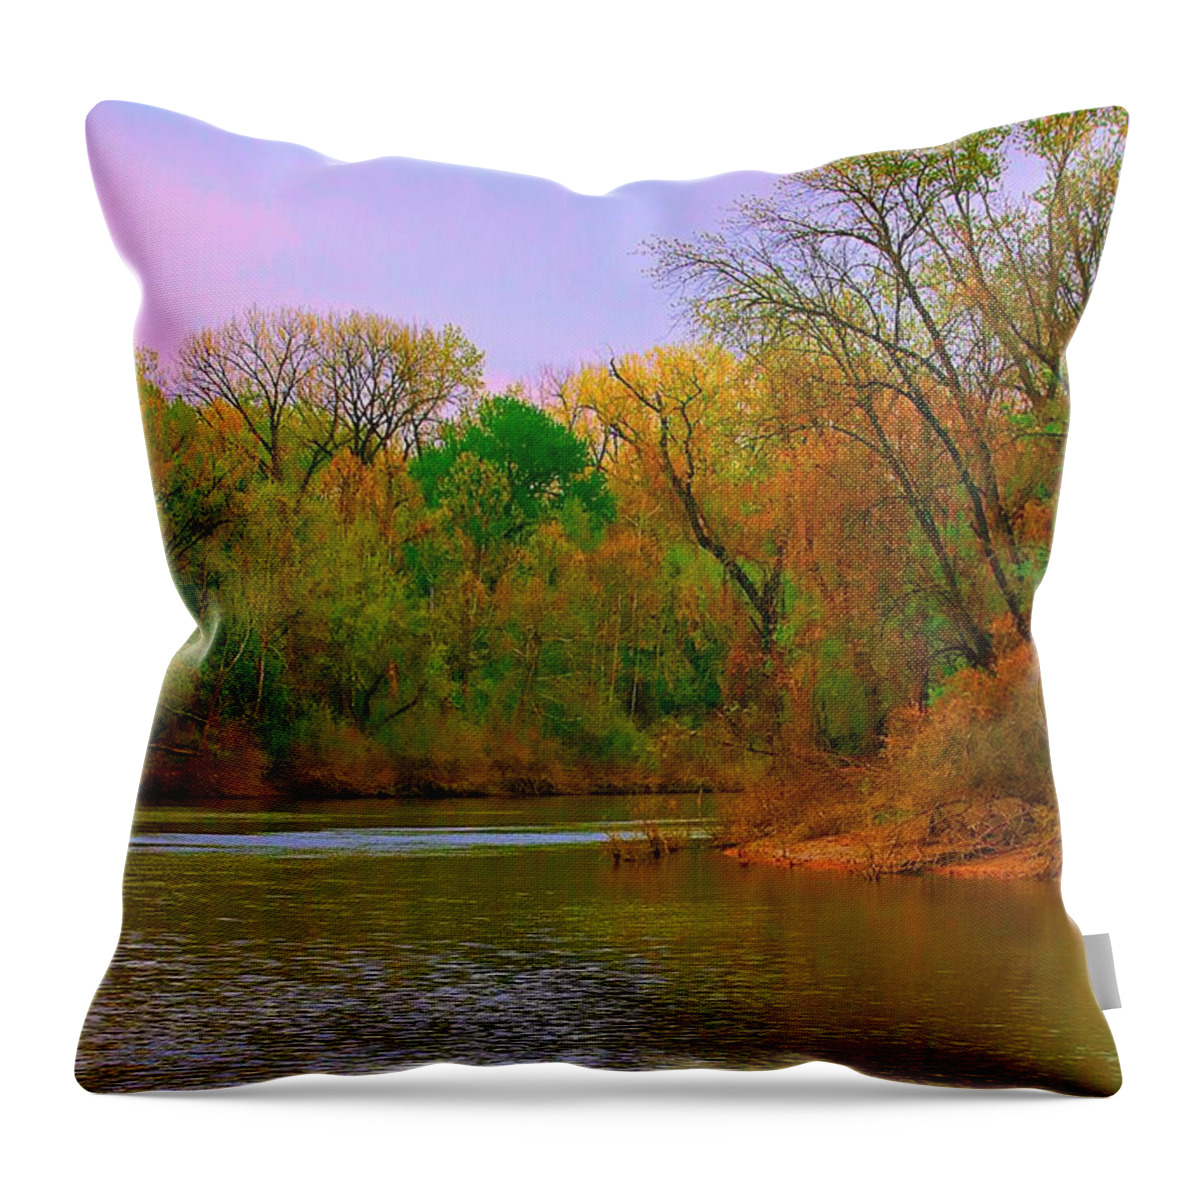 River Throw Pillow featuring the photograph Morning's Calling by Steve Warnstaff